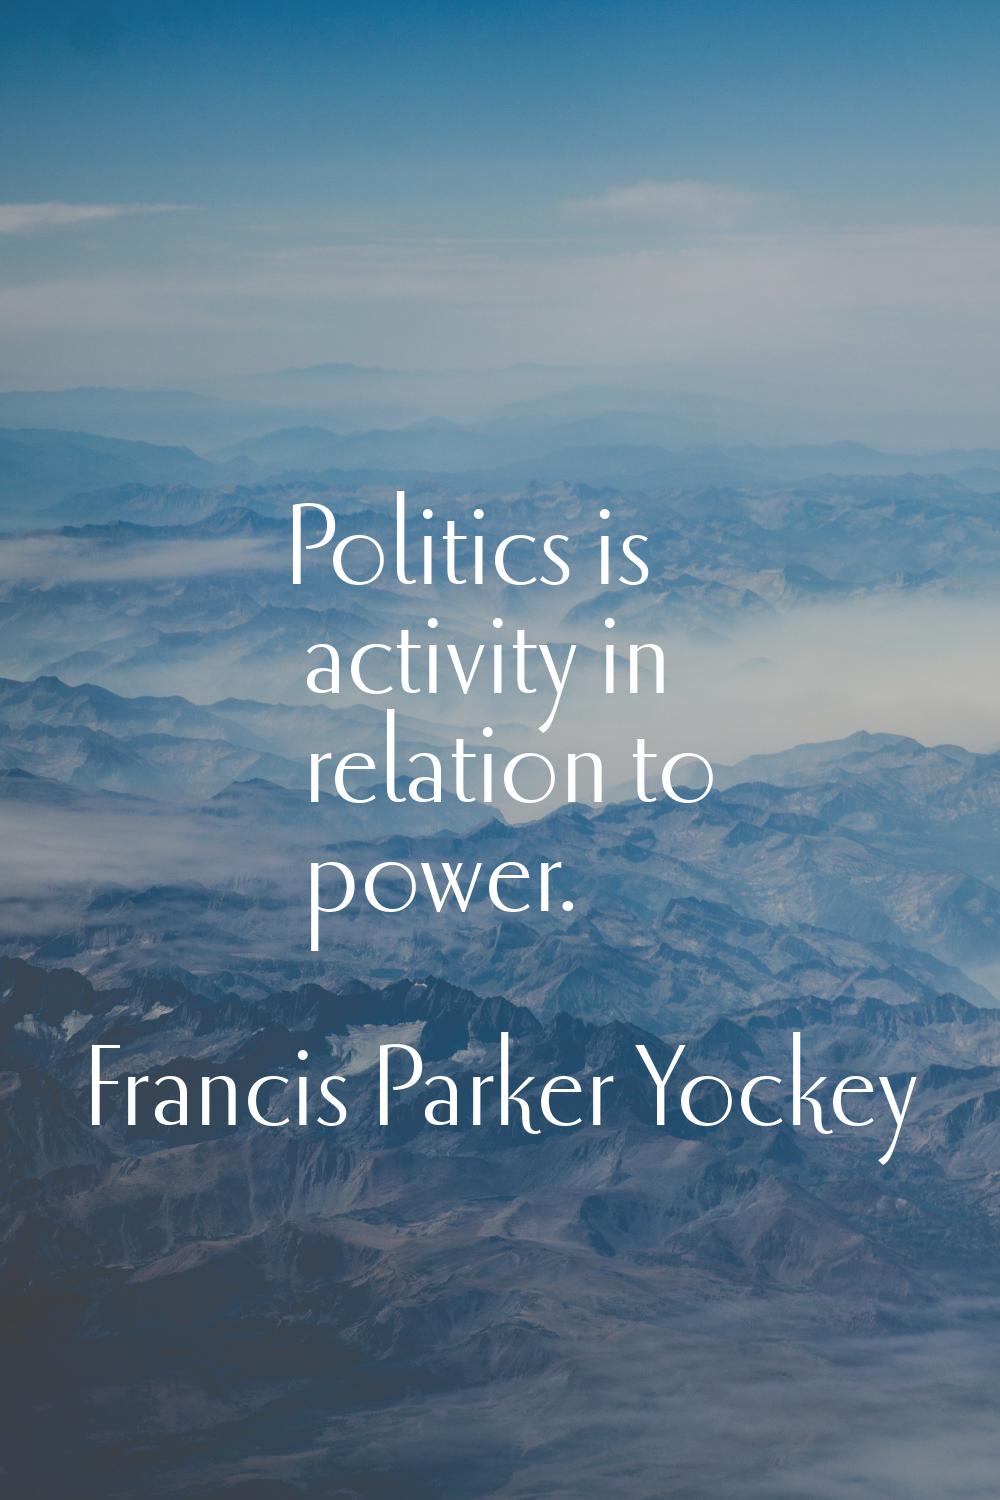 Politics is activity in relation to power.